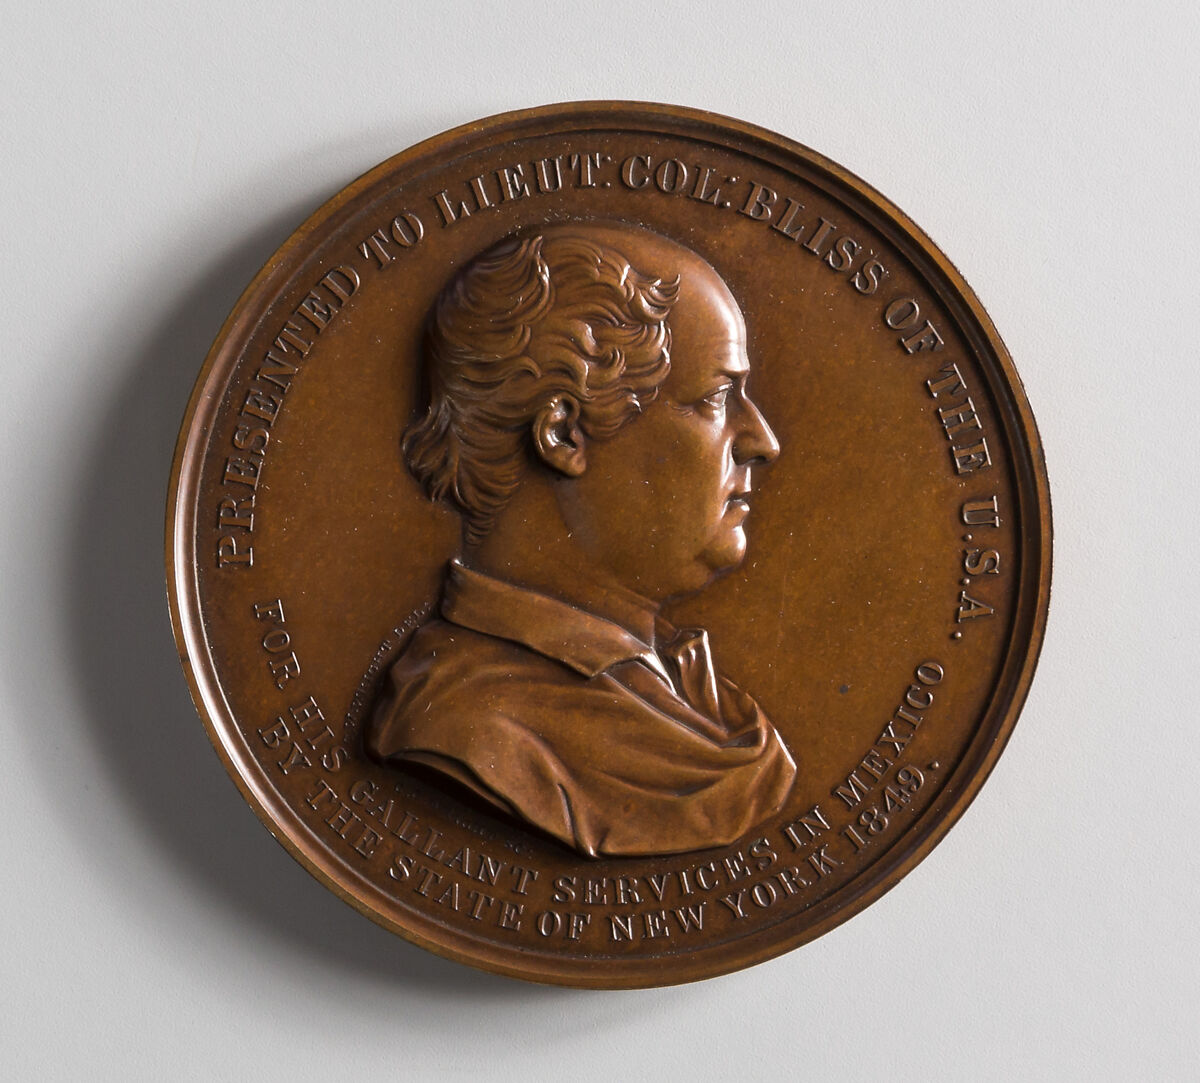 New York State to Louisiana to Lieutenant-Colonel Bliss, Charles Cushing Wright, Bronze, American 